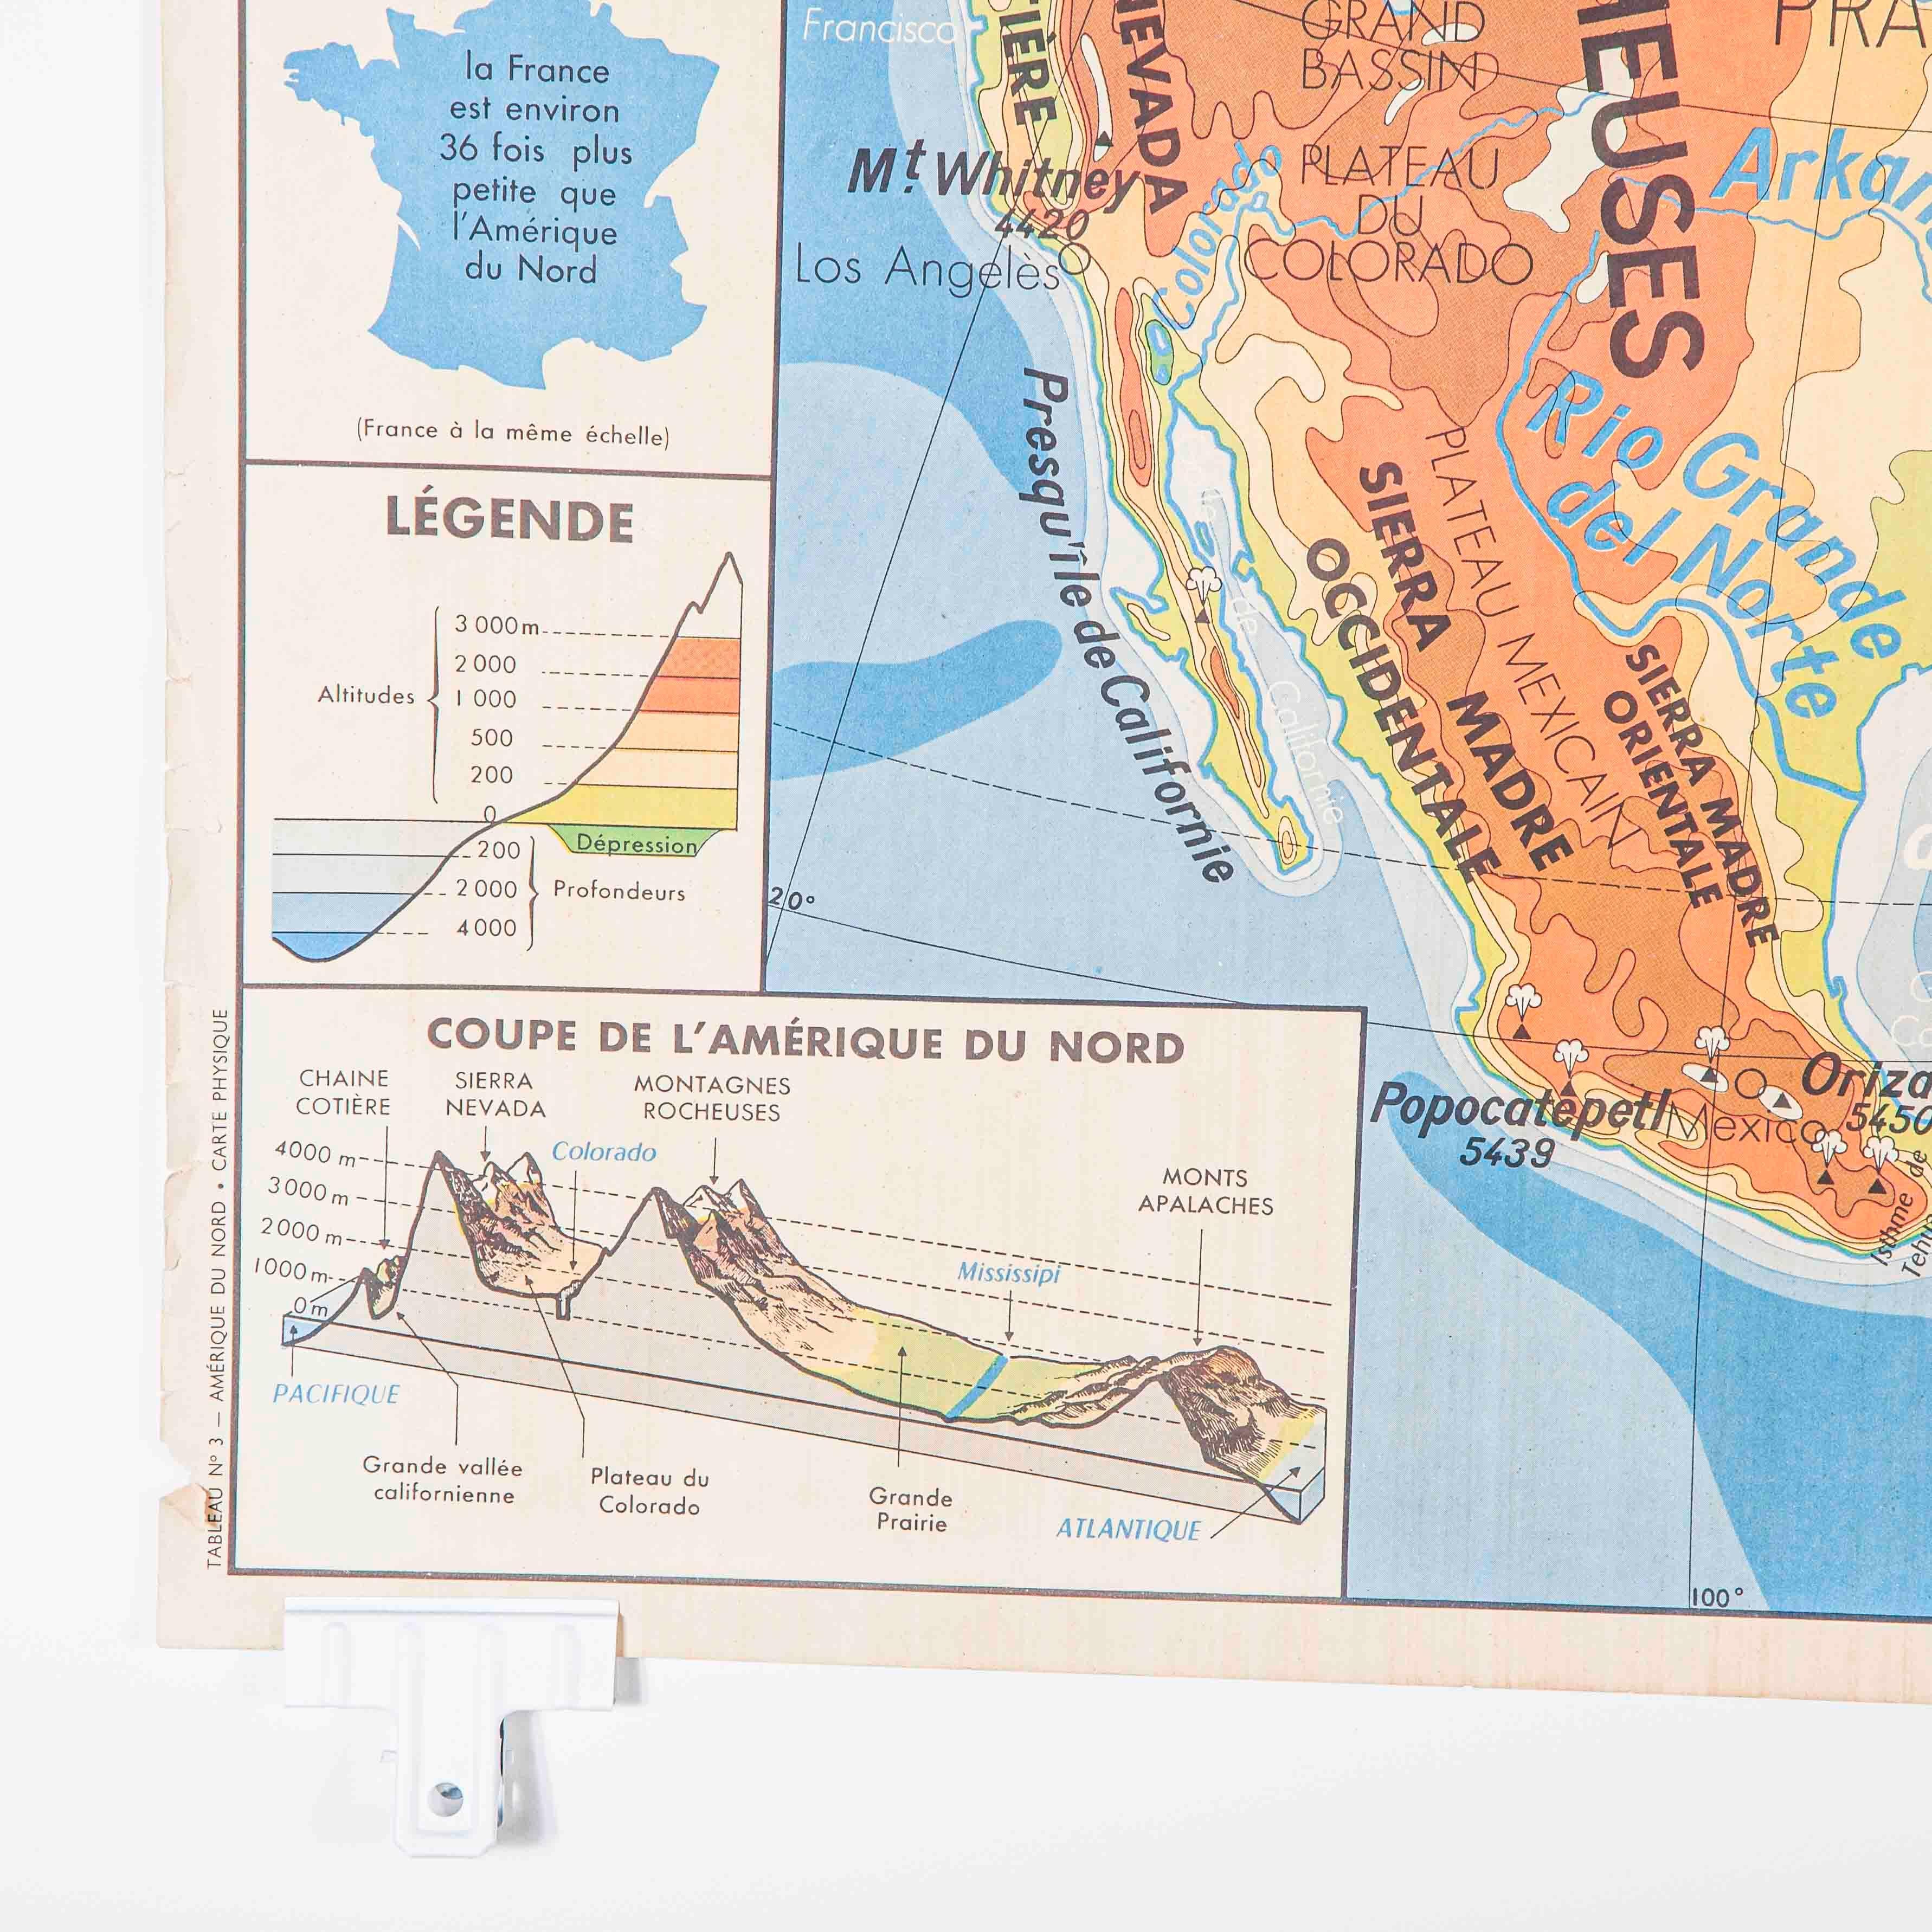 French Double Sided Educational School Poster Of The Physical Geography Of North America And Asia
French Double Sided Educational School Posters produced by La Maison des Instituteurs Saint Germain en Laye Paris. Heavy grade paper, excellent